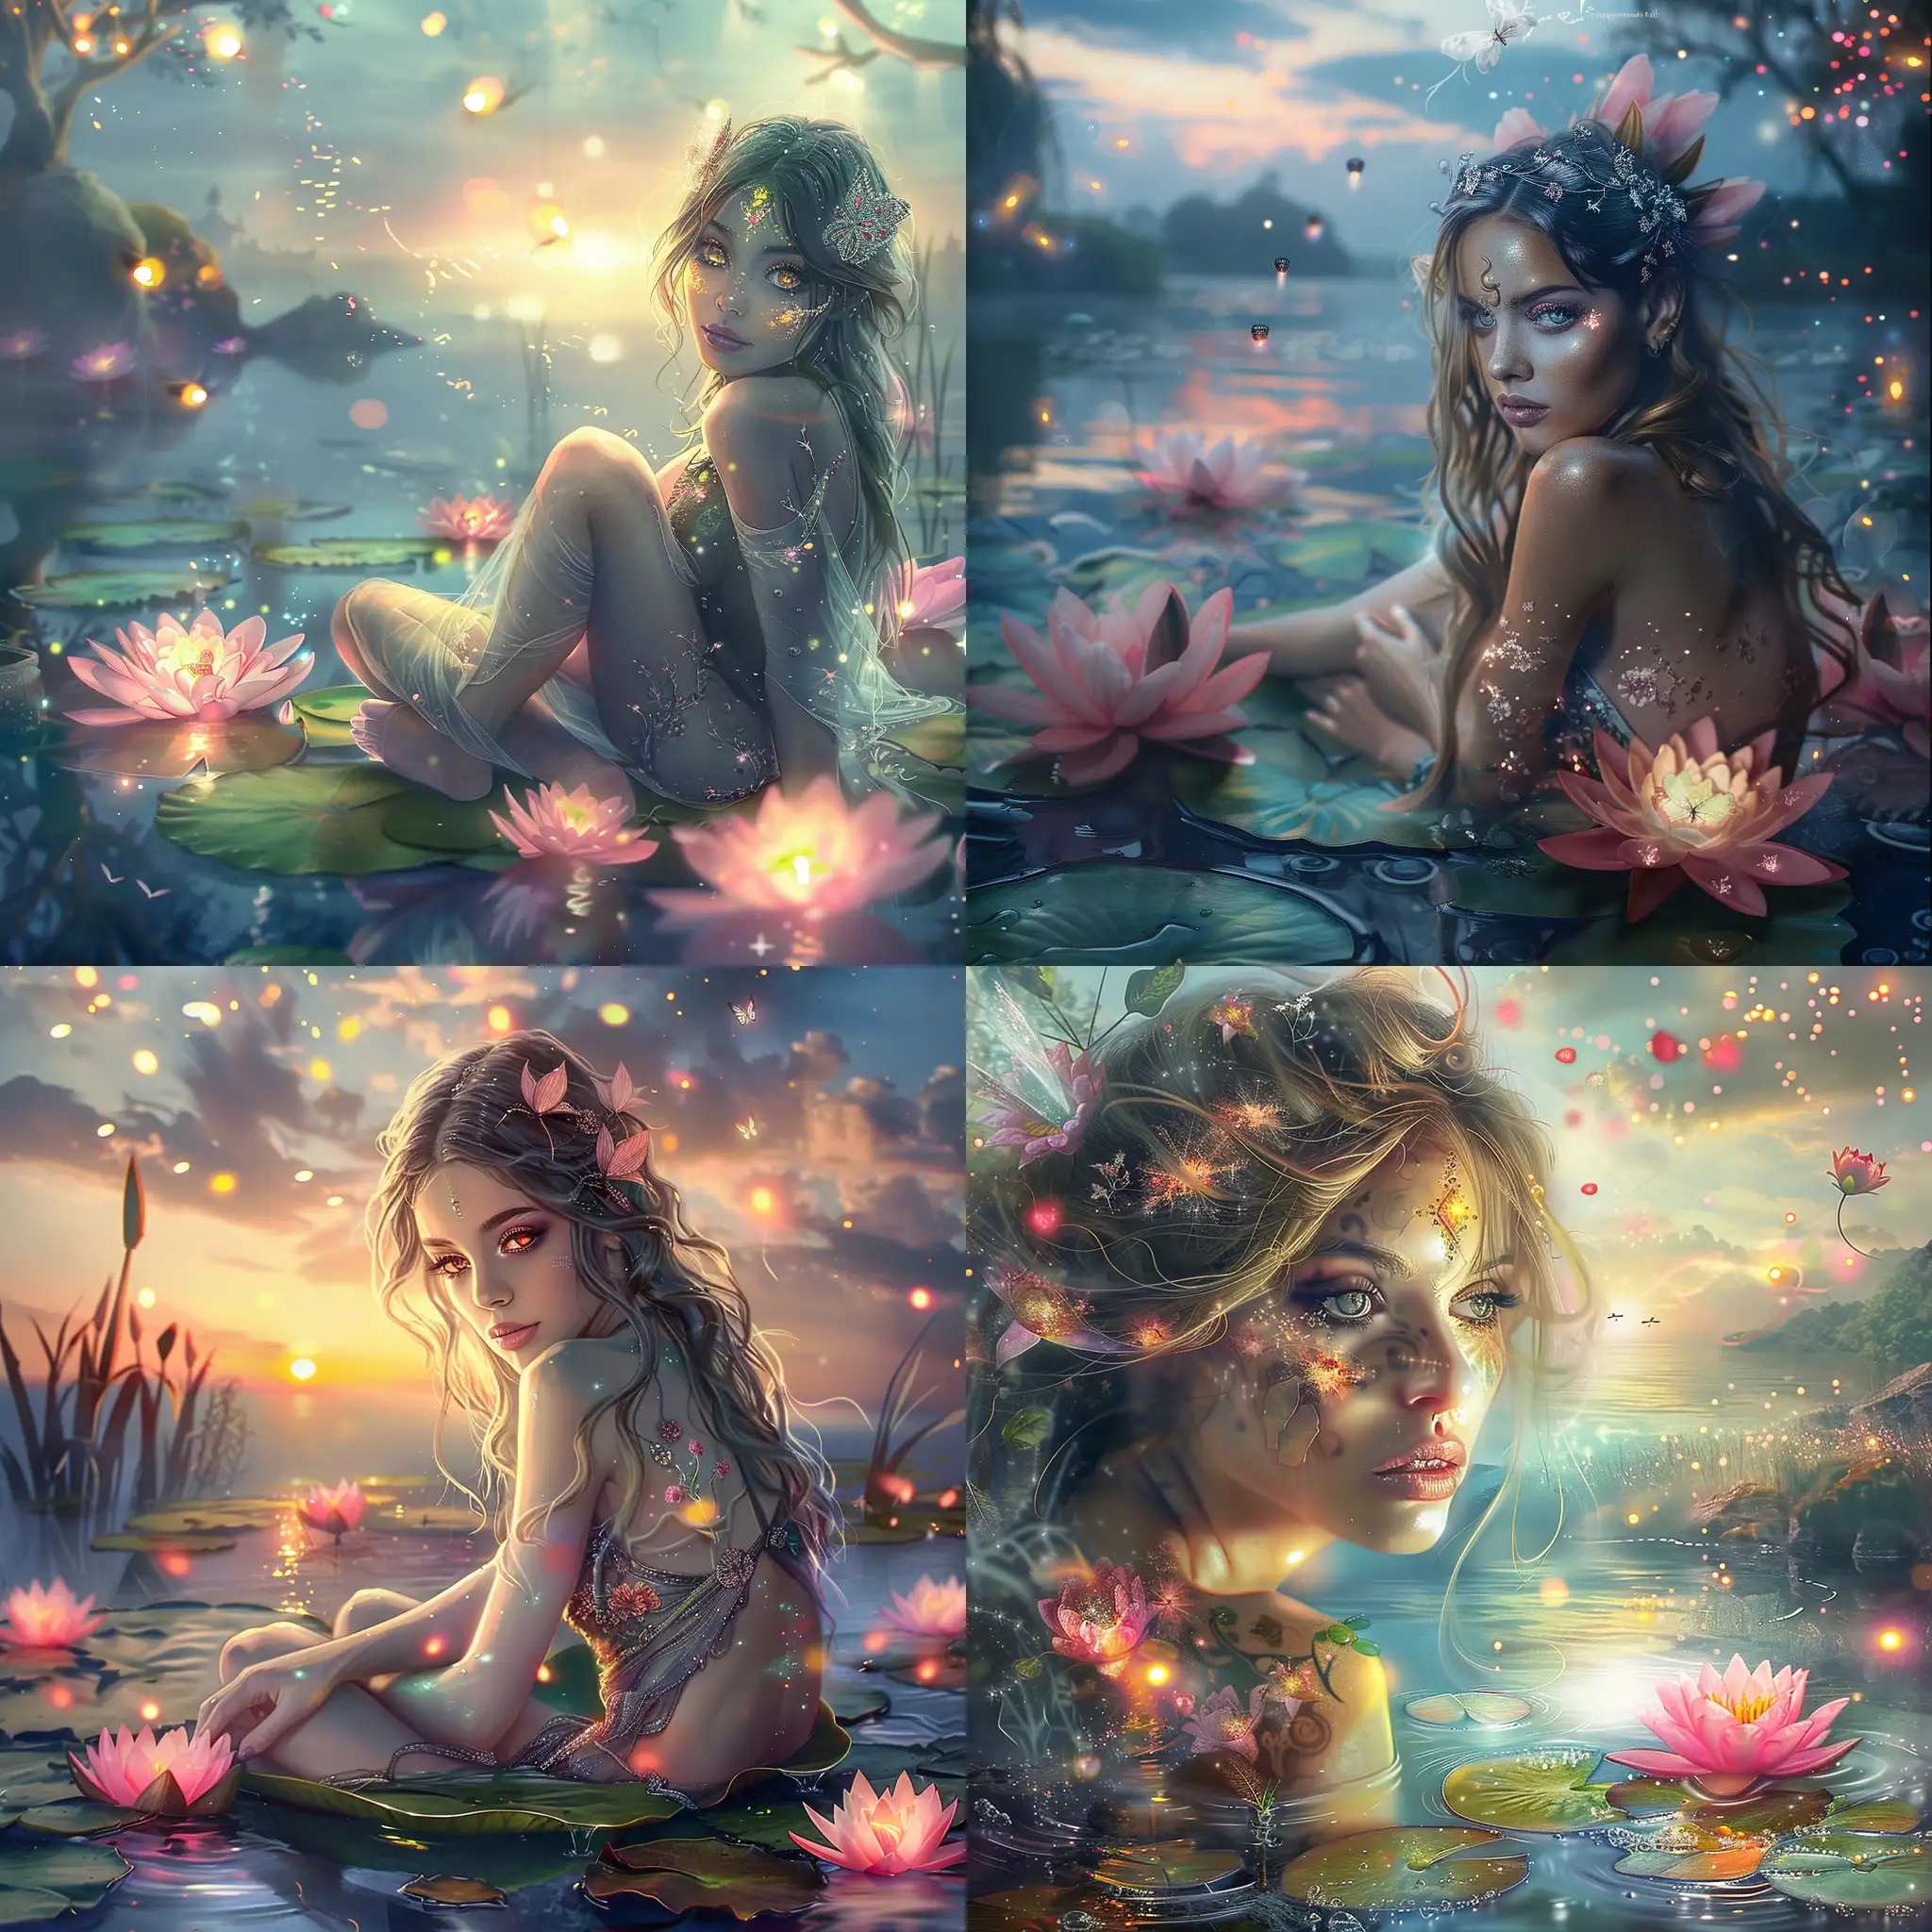 A highly detailed image of a beautiful water nymph woman  with delicate facial features and  beautiful eyes sitting on a lily pad in an enchanted lake. There are fireflies in the sky and a pink waterlilies are glowing. Beautiful magical fantasy mysterious etheral highly detailed 